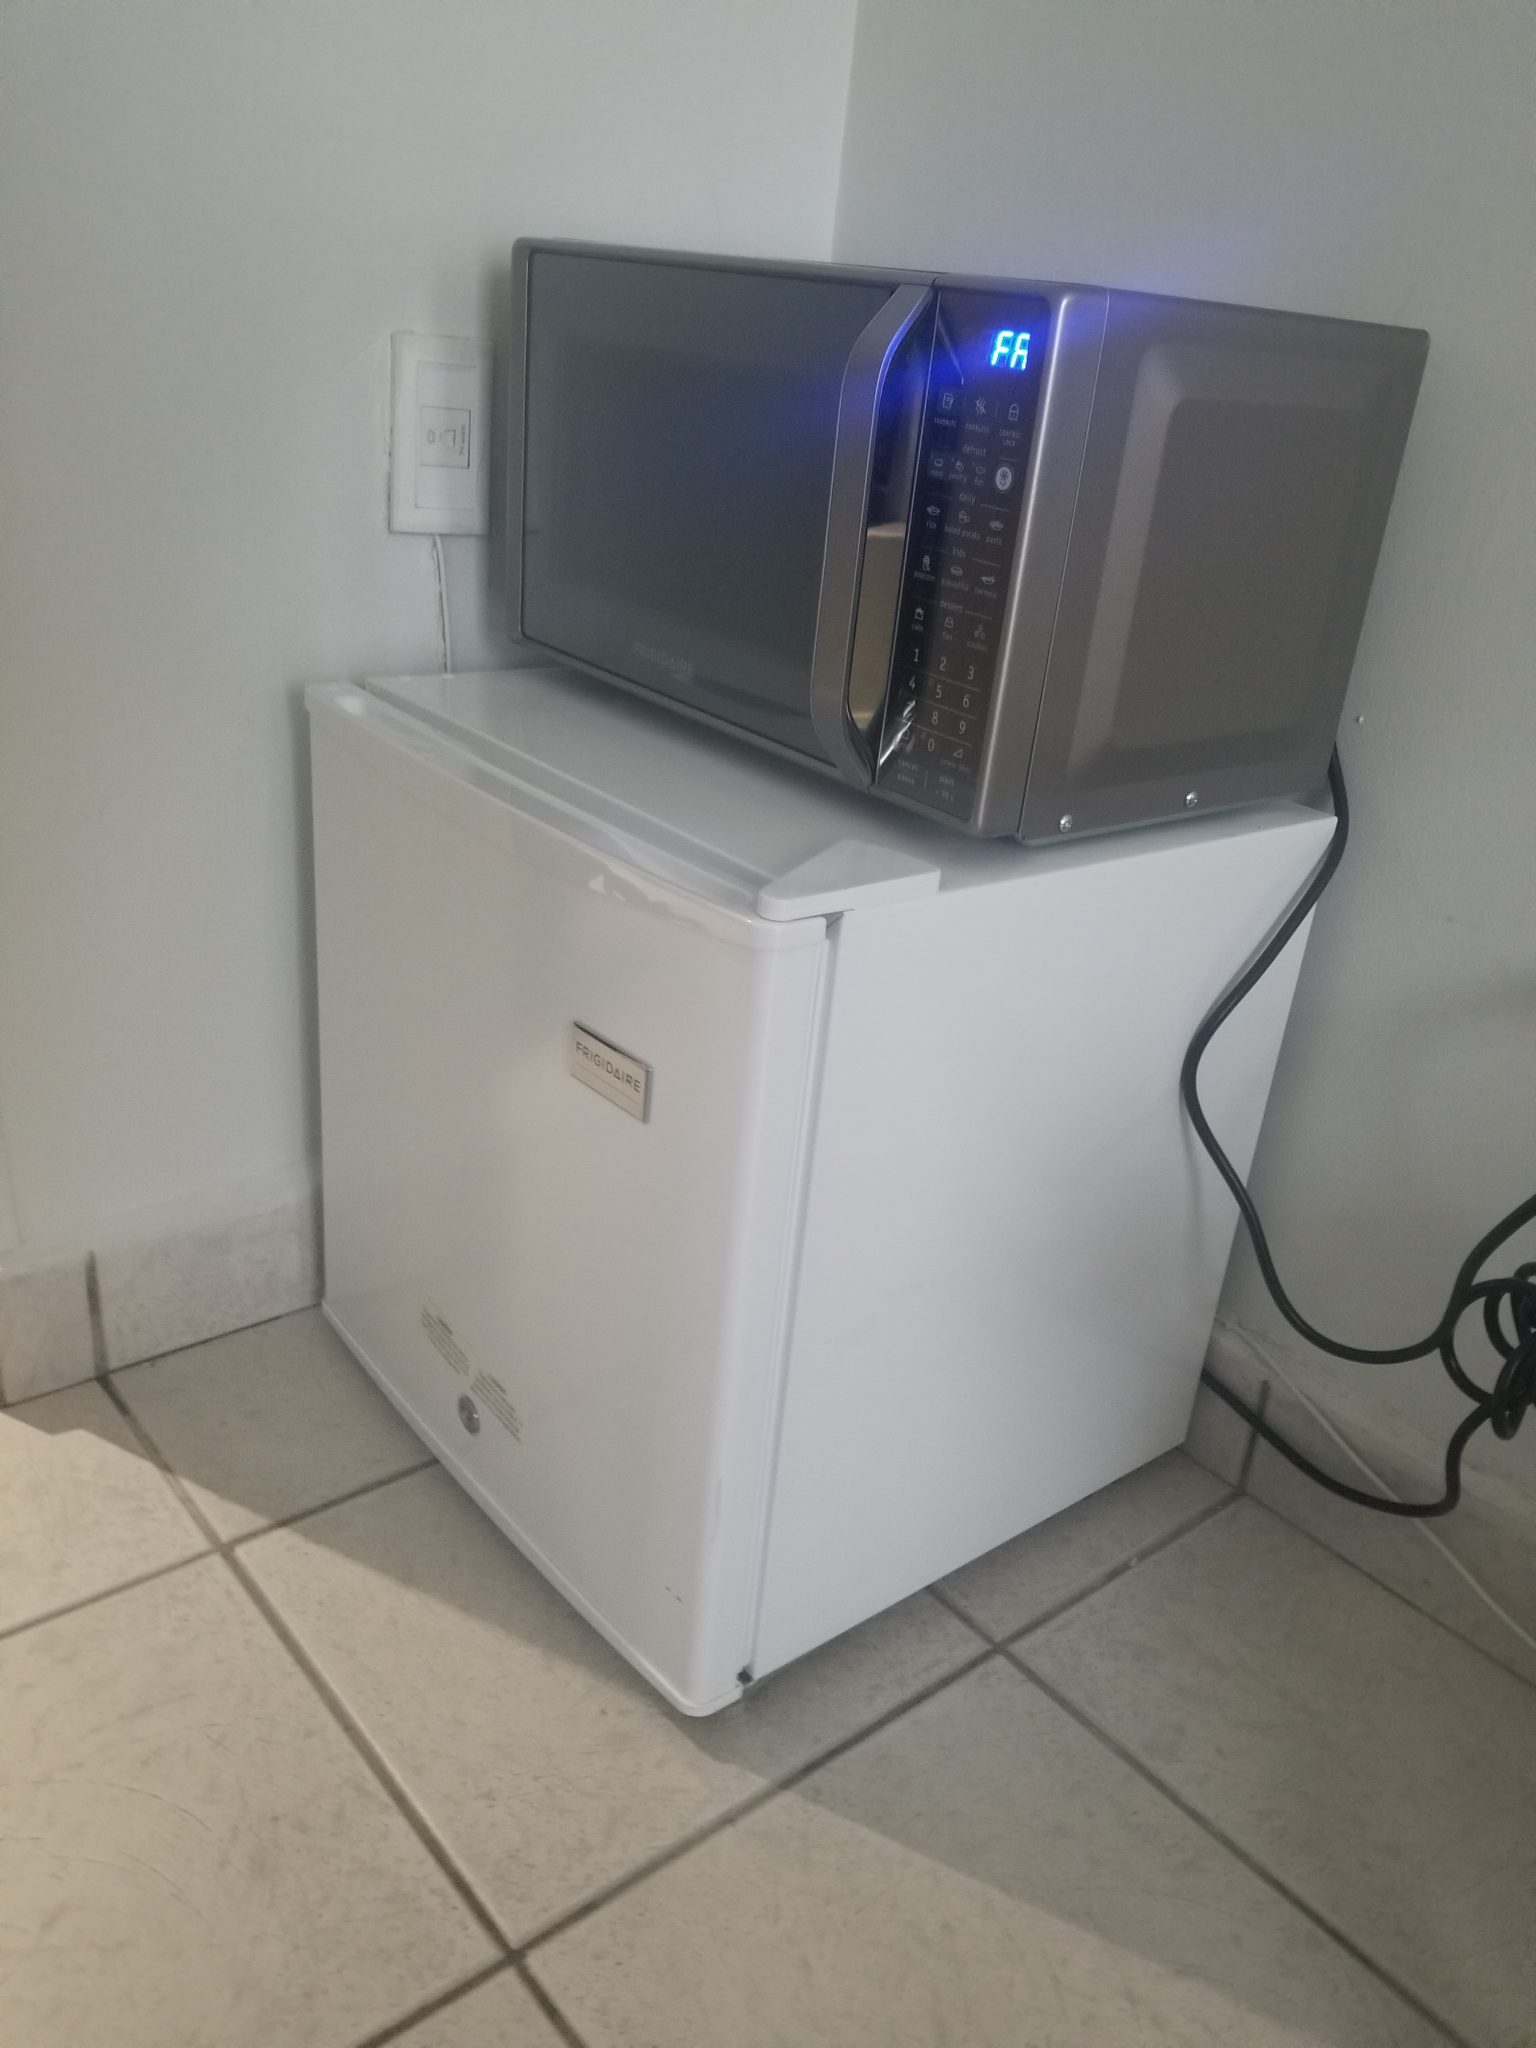 a microwave on top of a small refrigerator